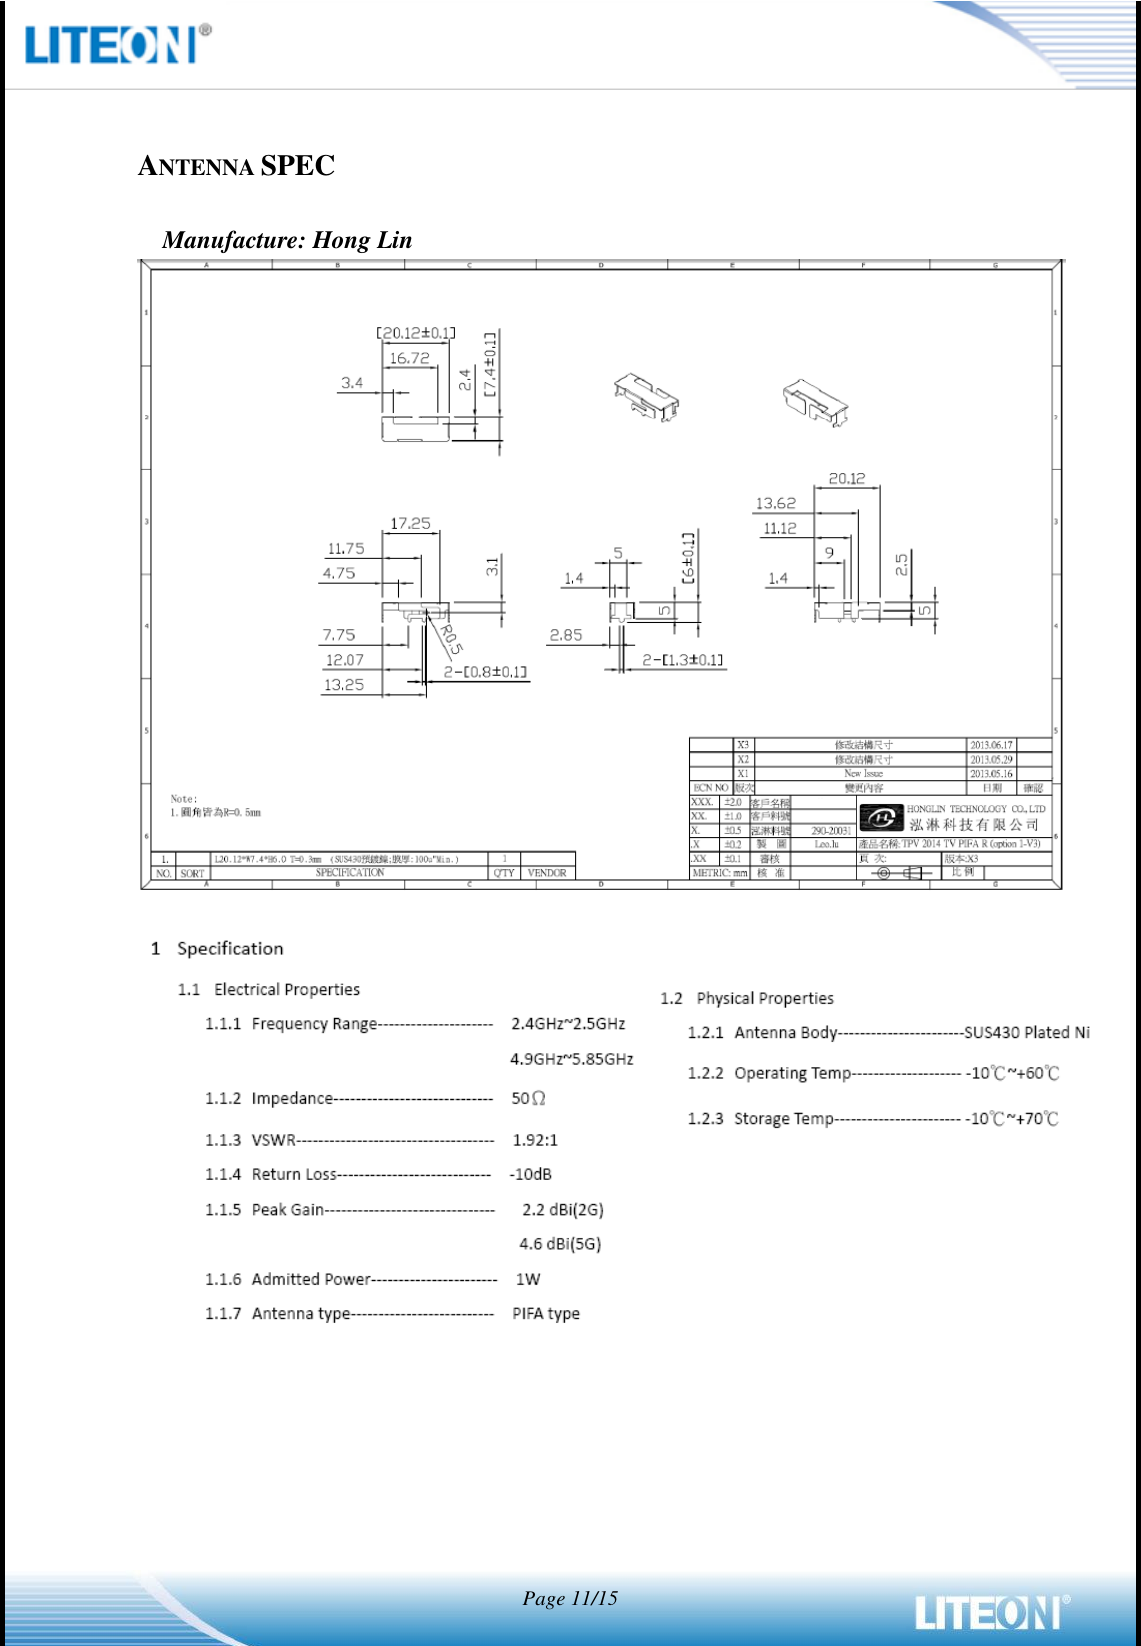   Page 11/15    ANTENNA SPEC  Manufacture: Hong Lin     